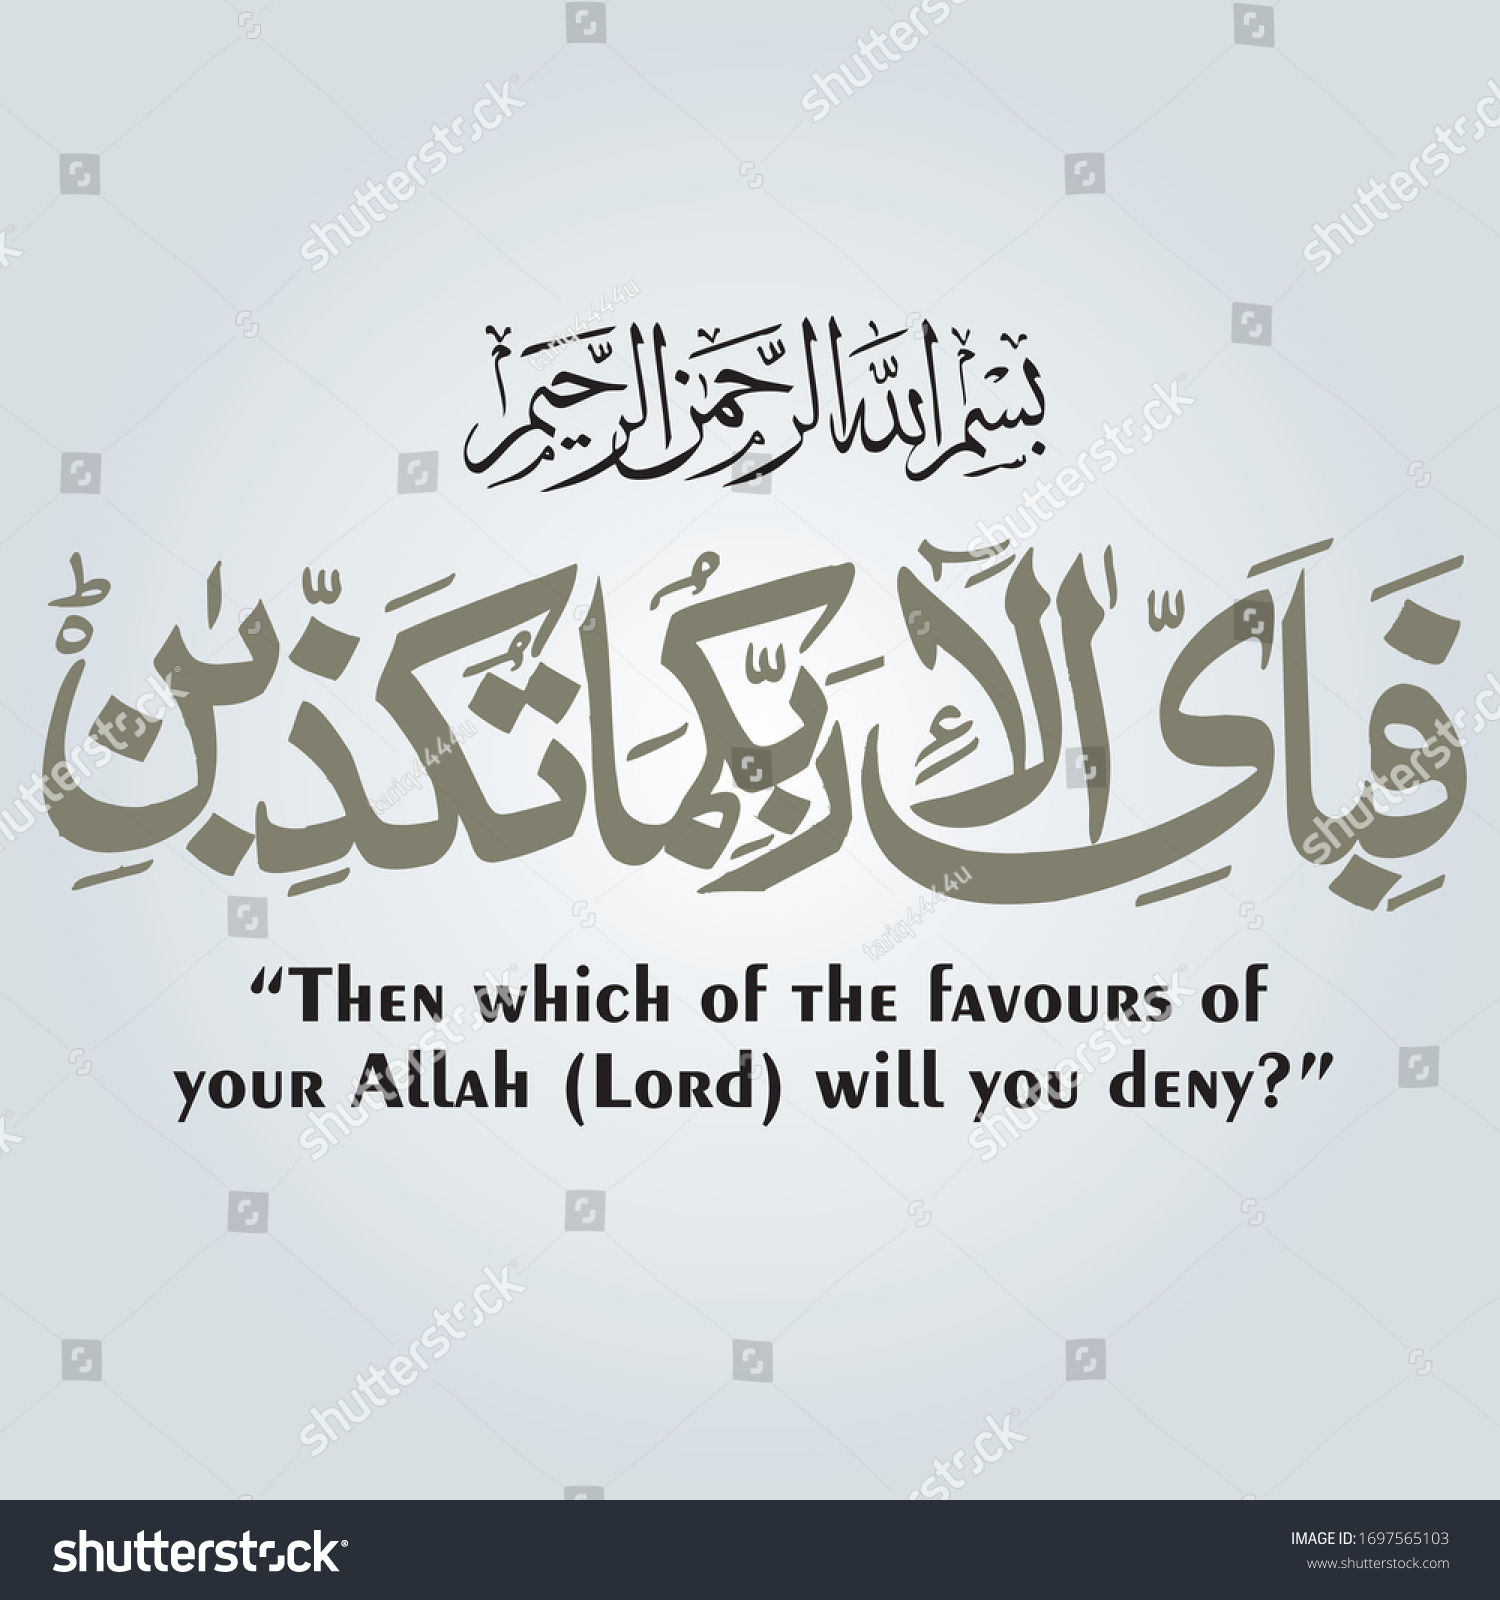 SVG of Islamic Arabic Calligraphy art with different style Duva, Darood, Quranic verses with Translation svg